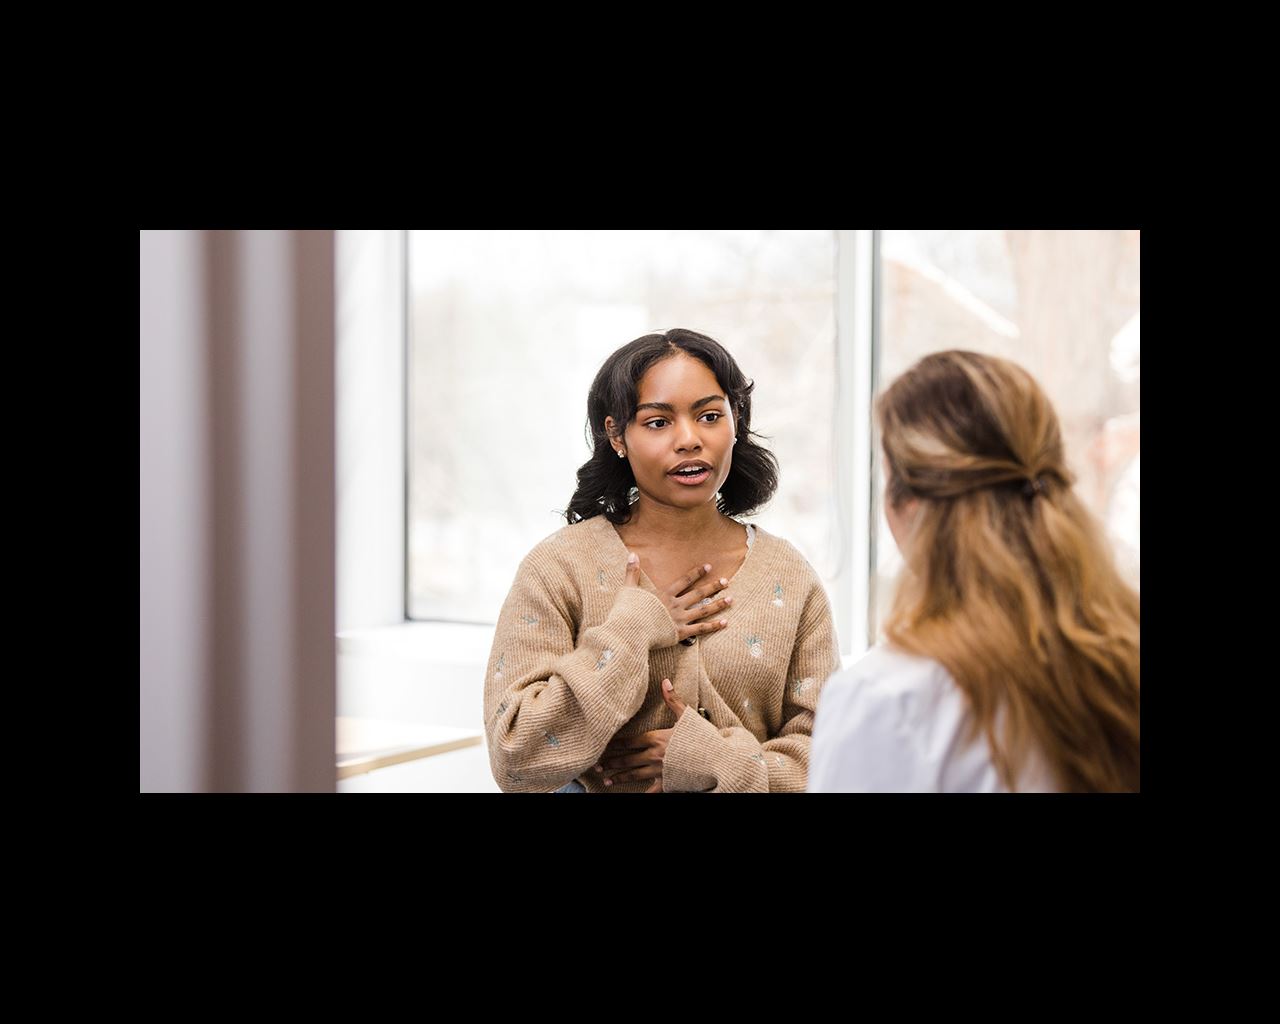 Provider listens as a female patient speaks